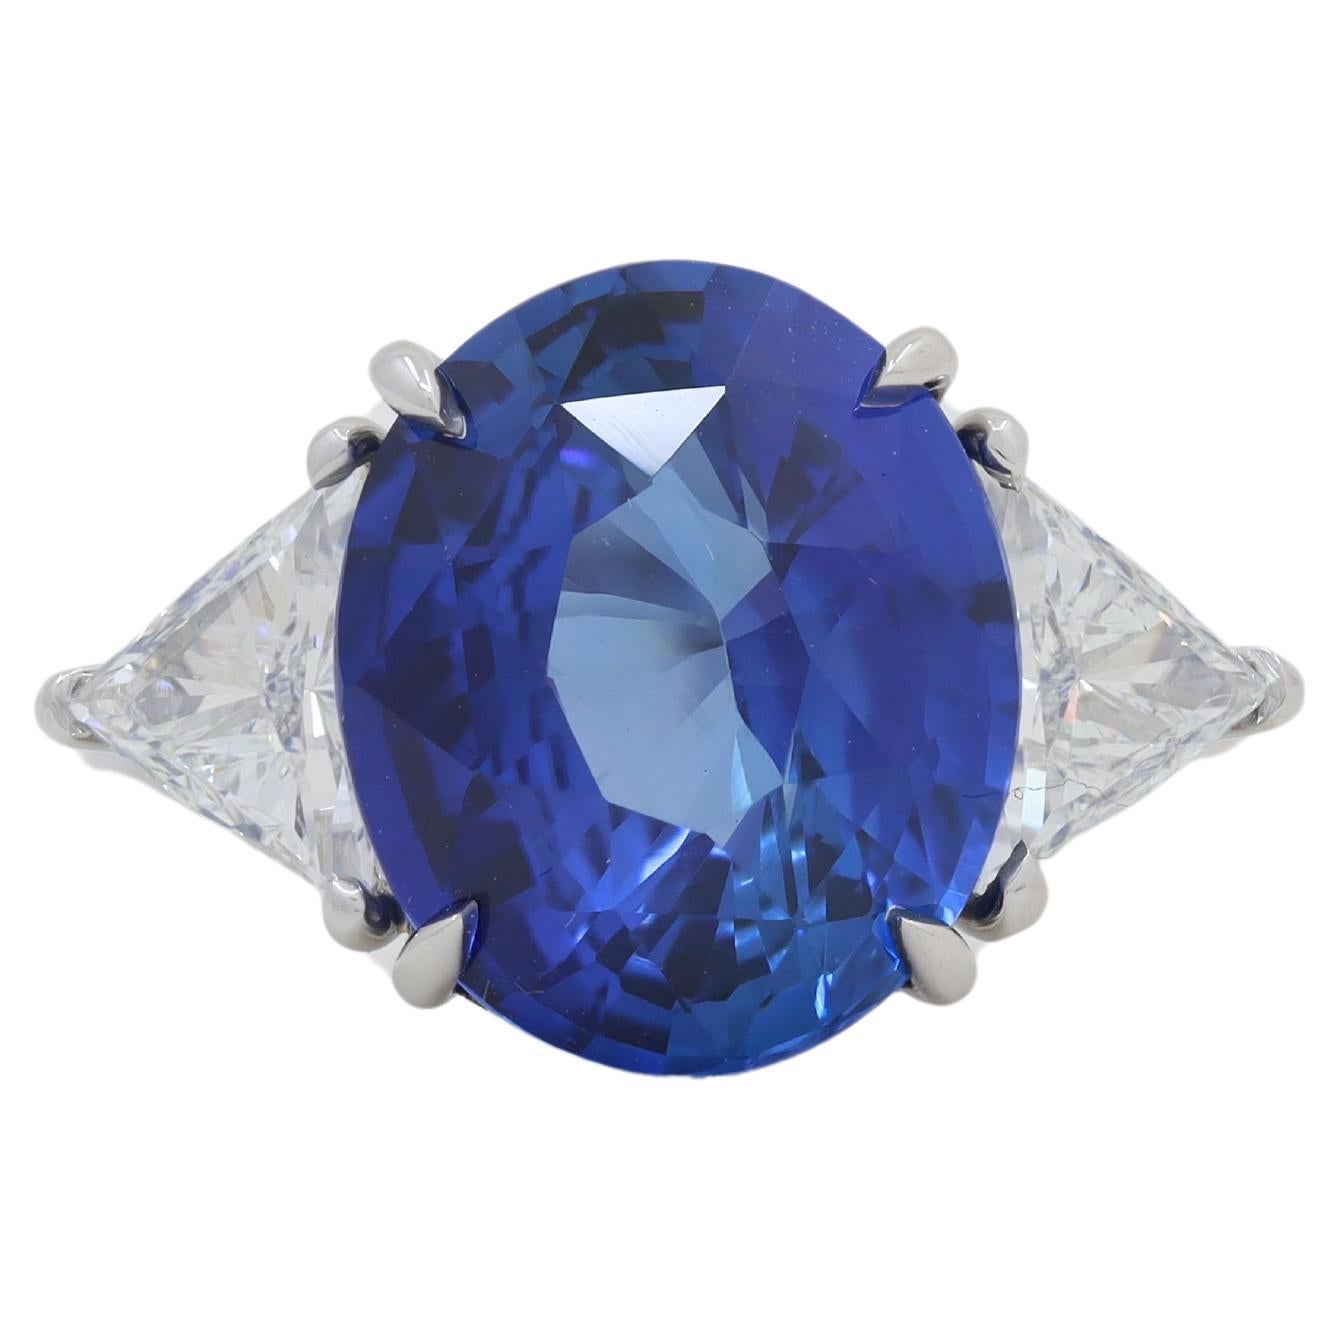 Diana M. Platinum ring featuring an 8.51 ct Ceylon sapphire with 2 trillants   For Sale